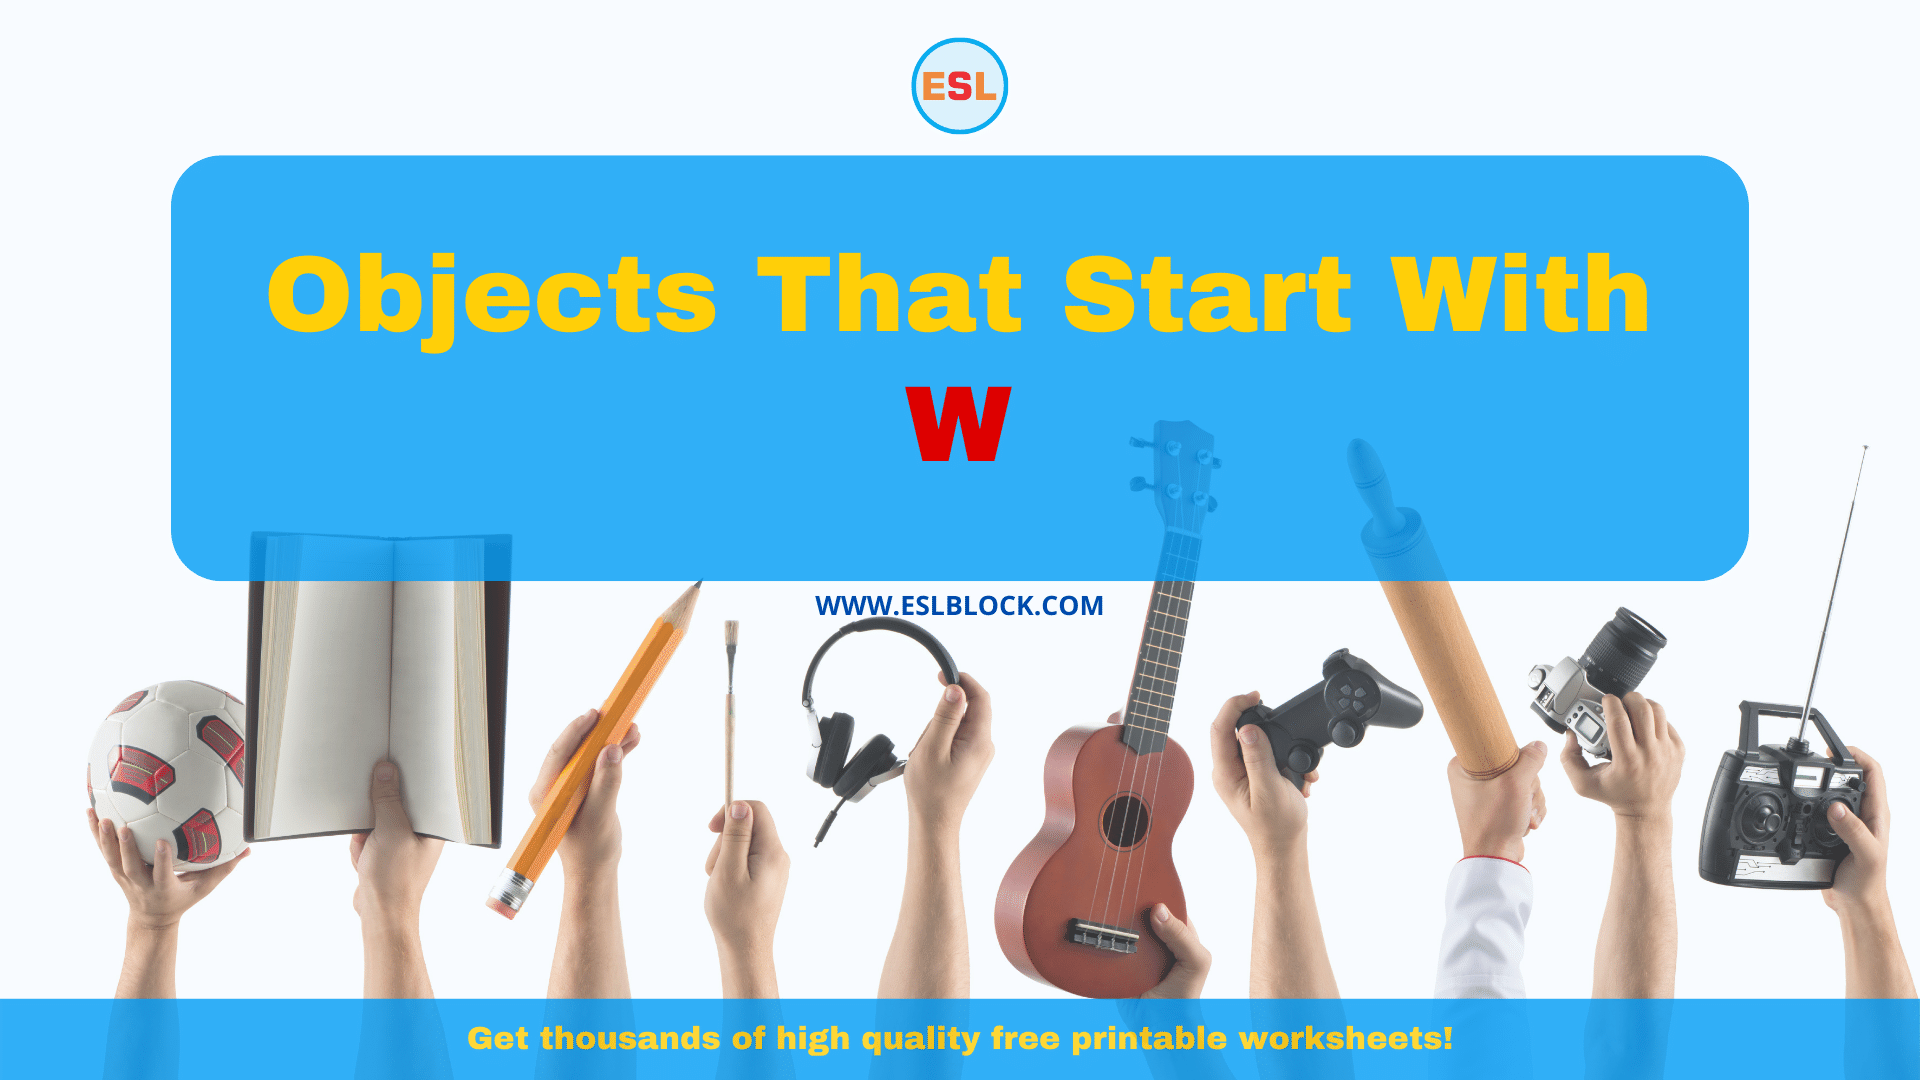 5 Letter Objects Starting With W, English, English Nouns, English Vocabulary, English Words, List of Objects That Start With W, Nouns, Objects List, Objects That Start With W, Things Names, Vocabulary, W Objects, W Objects in English, W Objects Names